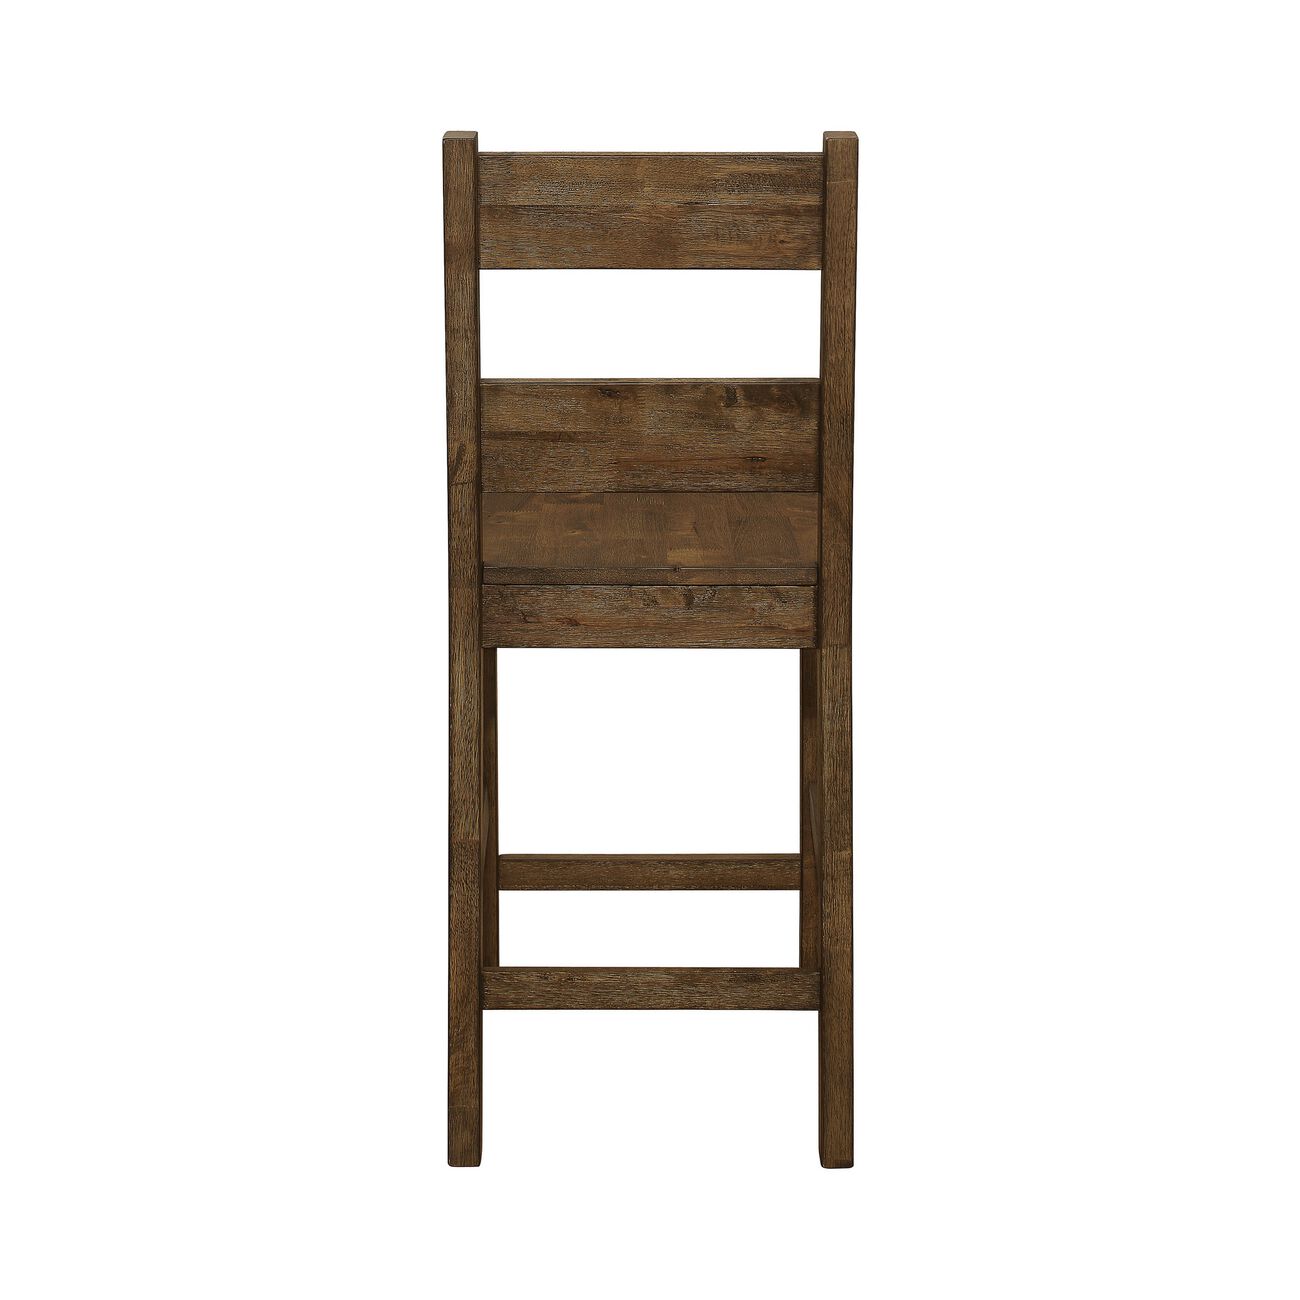 Rustic Ladder Back Counter Height Chair with Wooden Seat, Set of 2, Brown